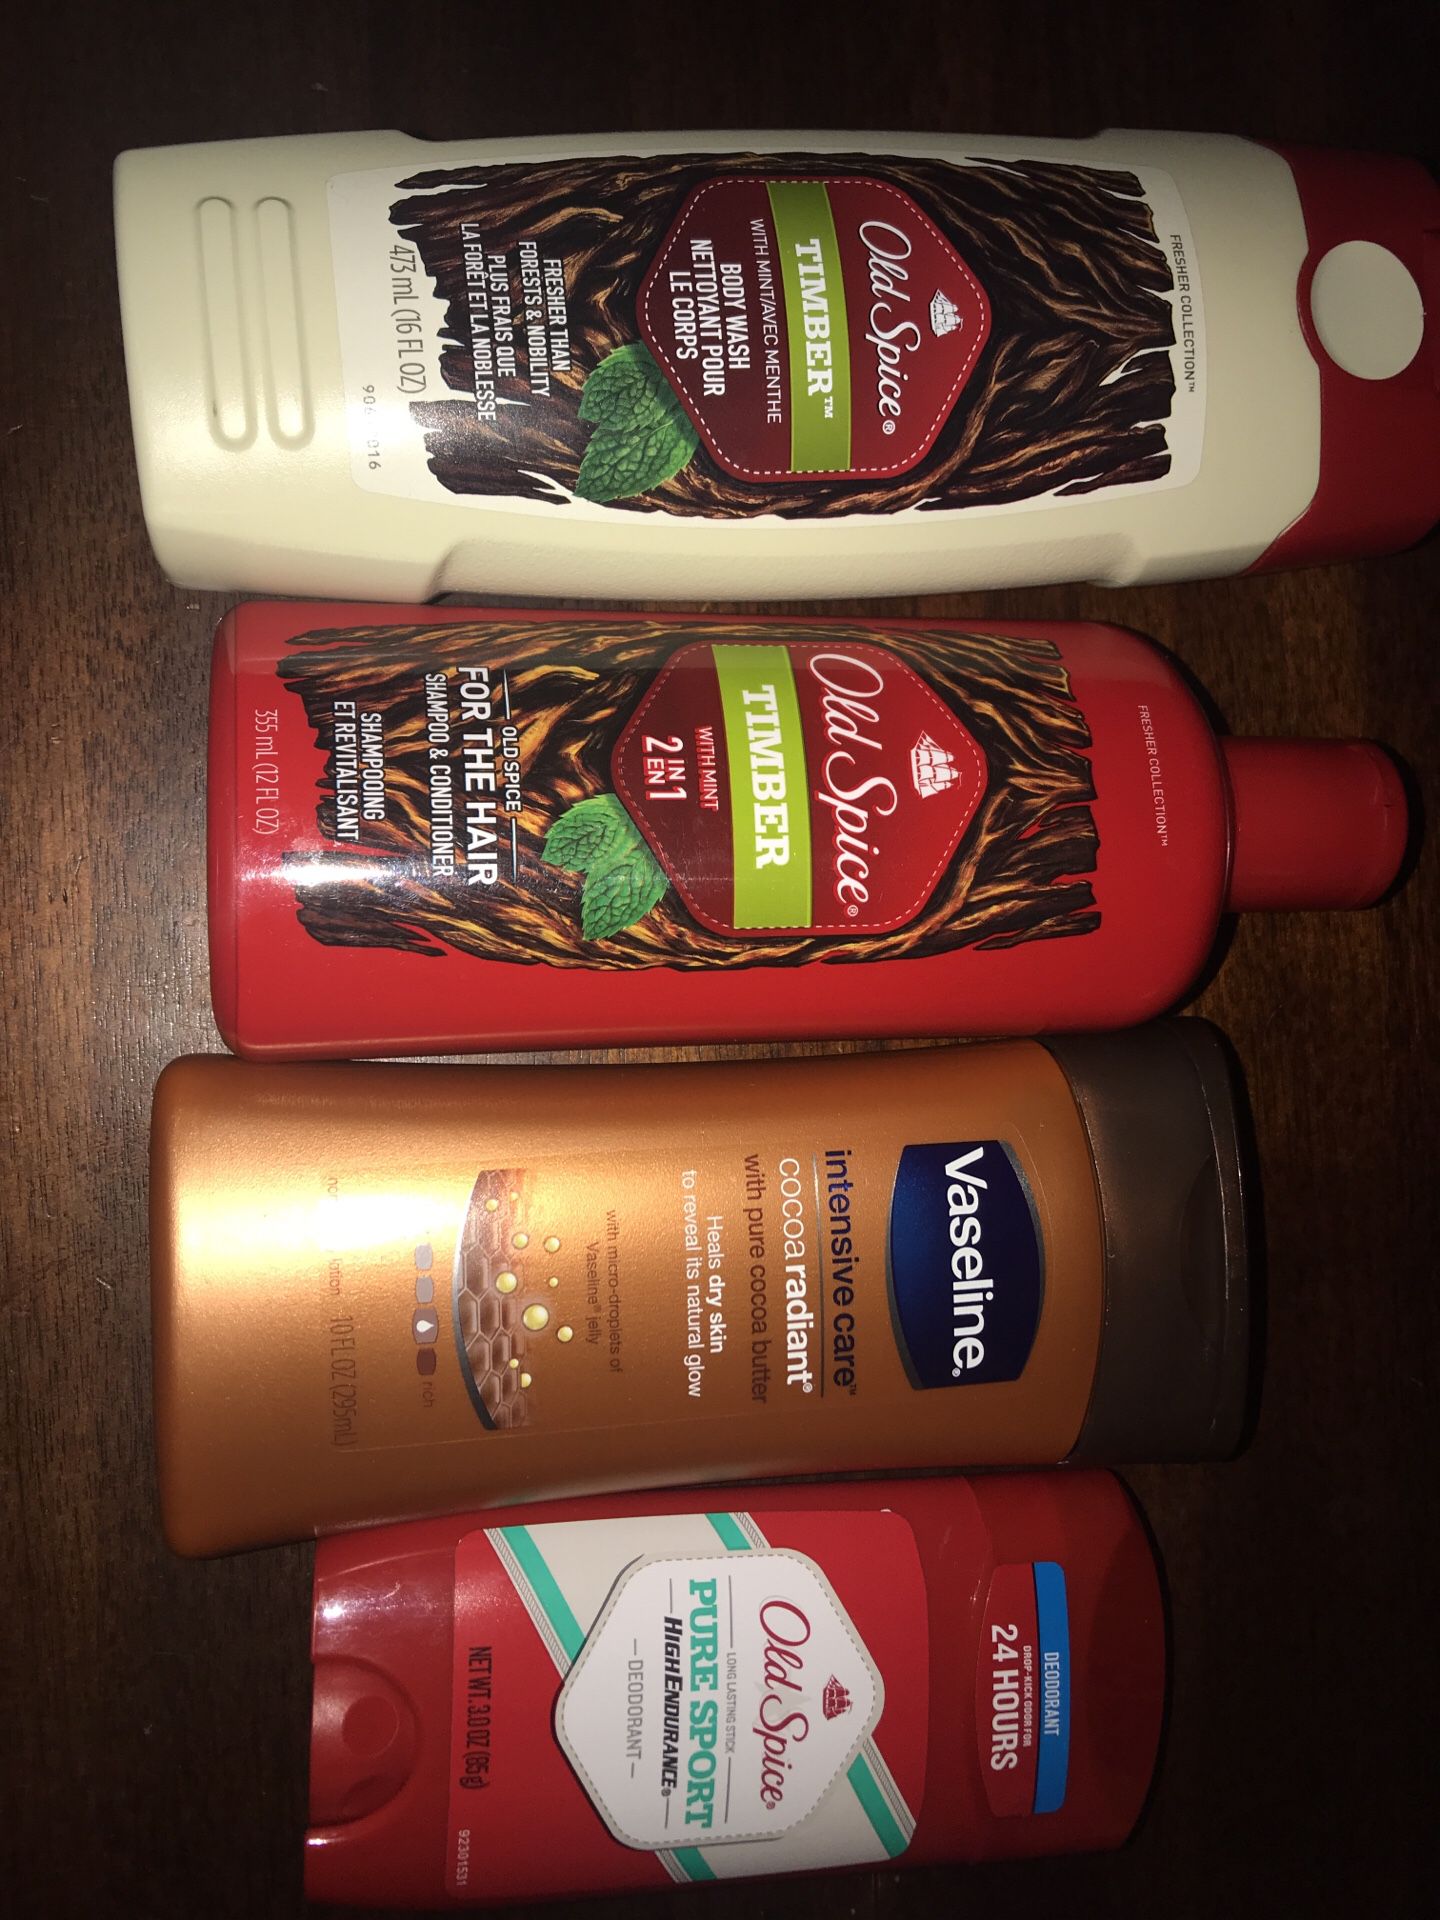 Old Spice body wash,deodorant,2 in 1 Shampoos and Conditioner and 1 Vaseline lotion for $10 all